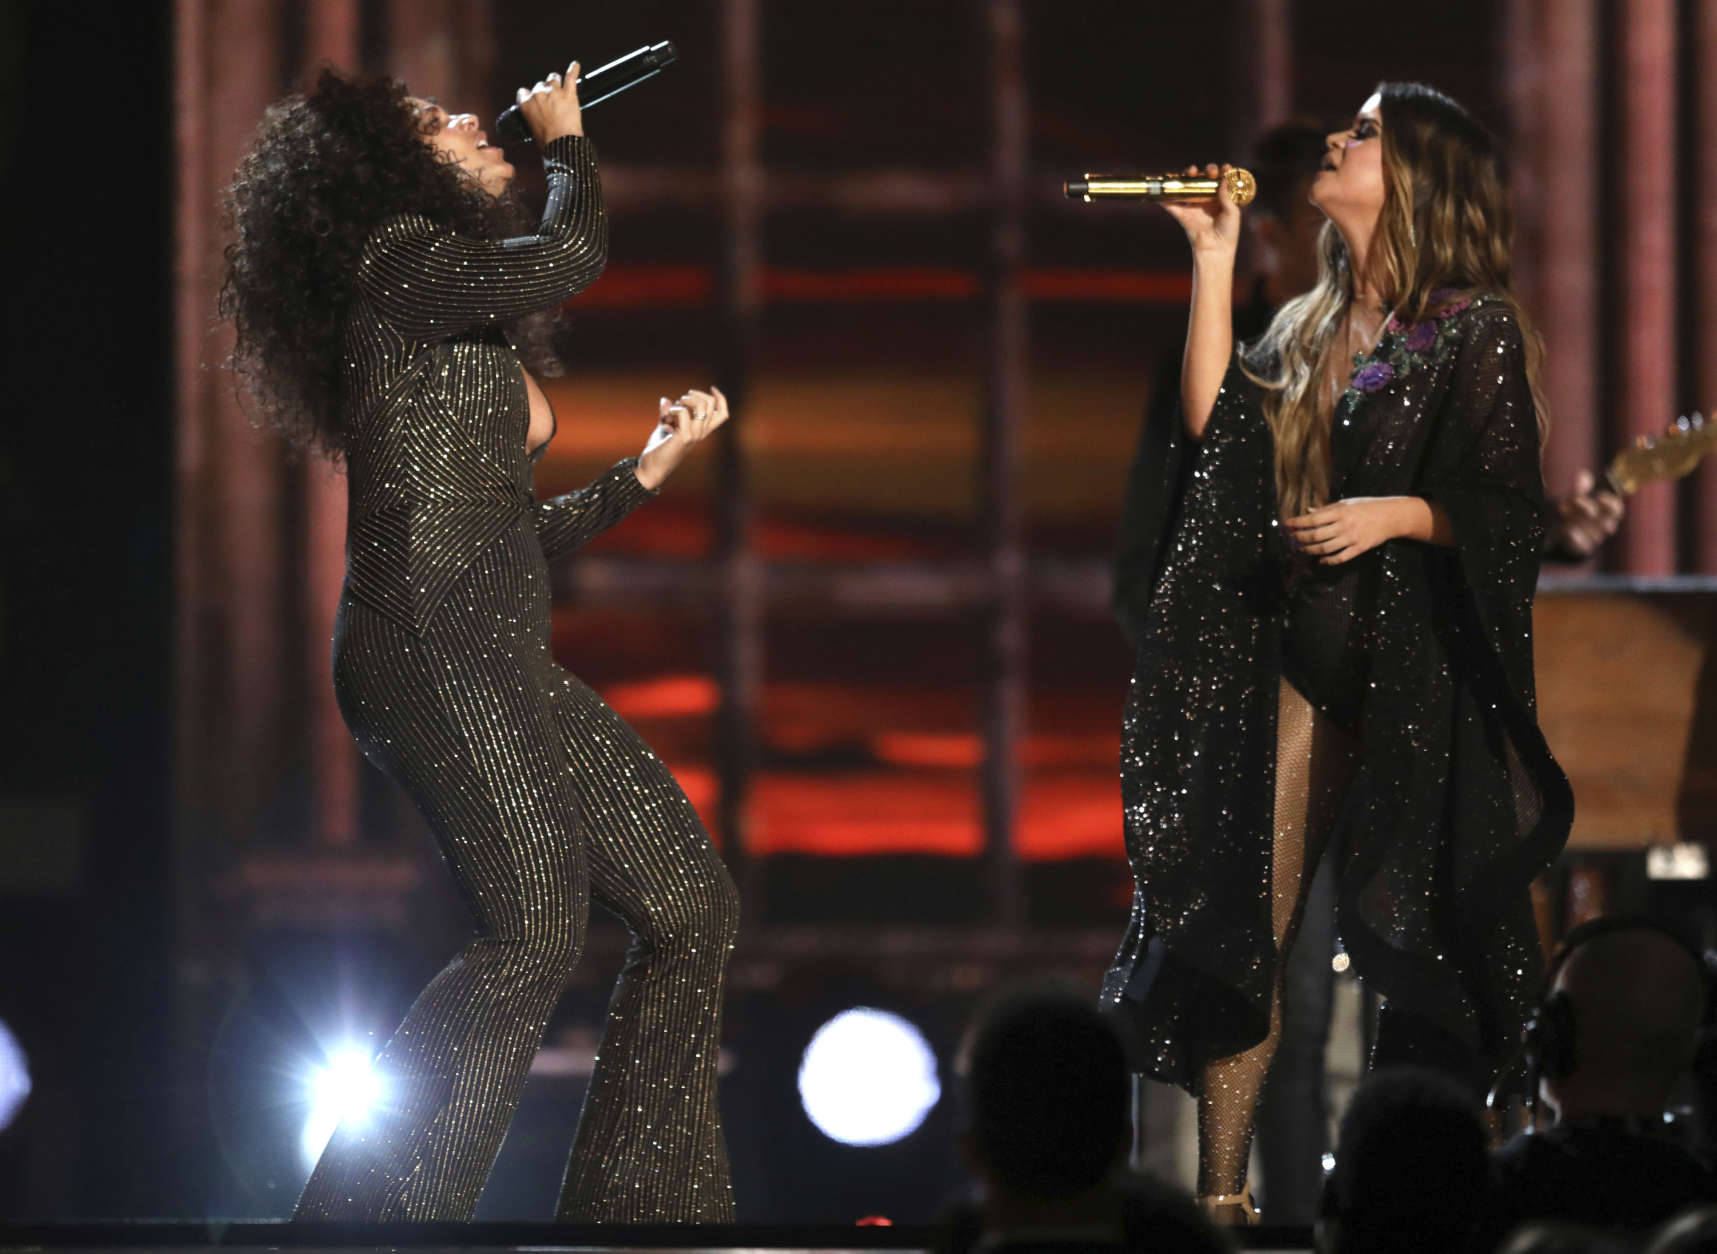 Alicia Keys, left, and Maren Morris perform "Once" at the 59th annual Grammy Awards on Sunday, Feb. 12, 2017, in Los Angeles. (Photo by Matt Sayles/Invision/AP)